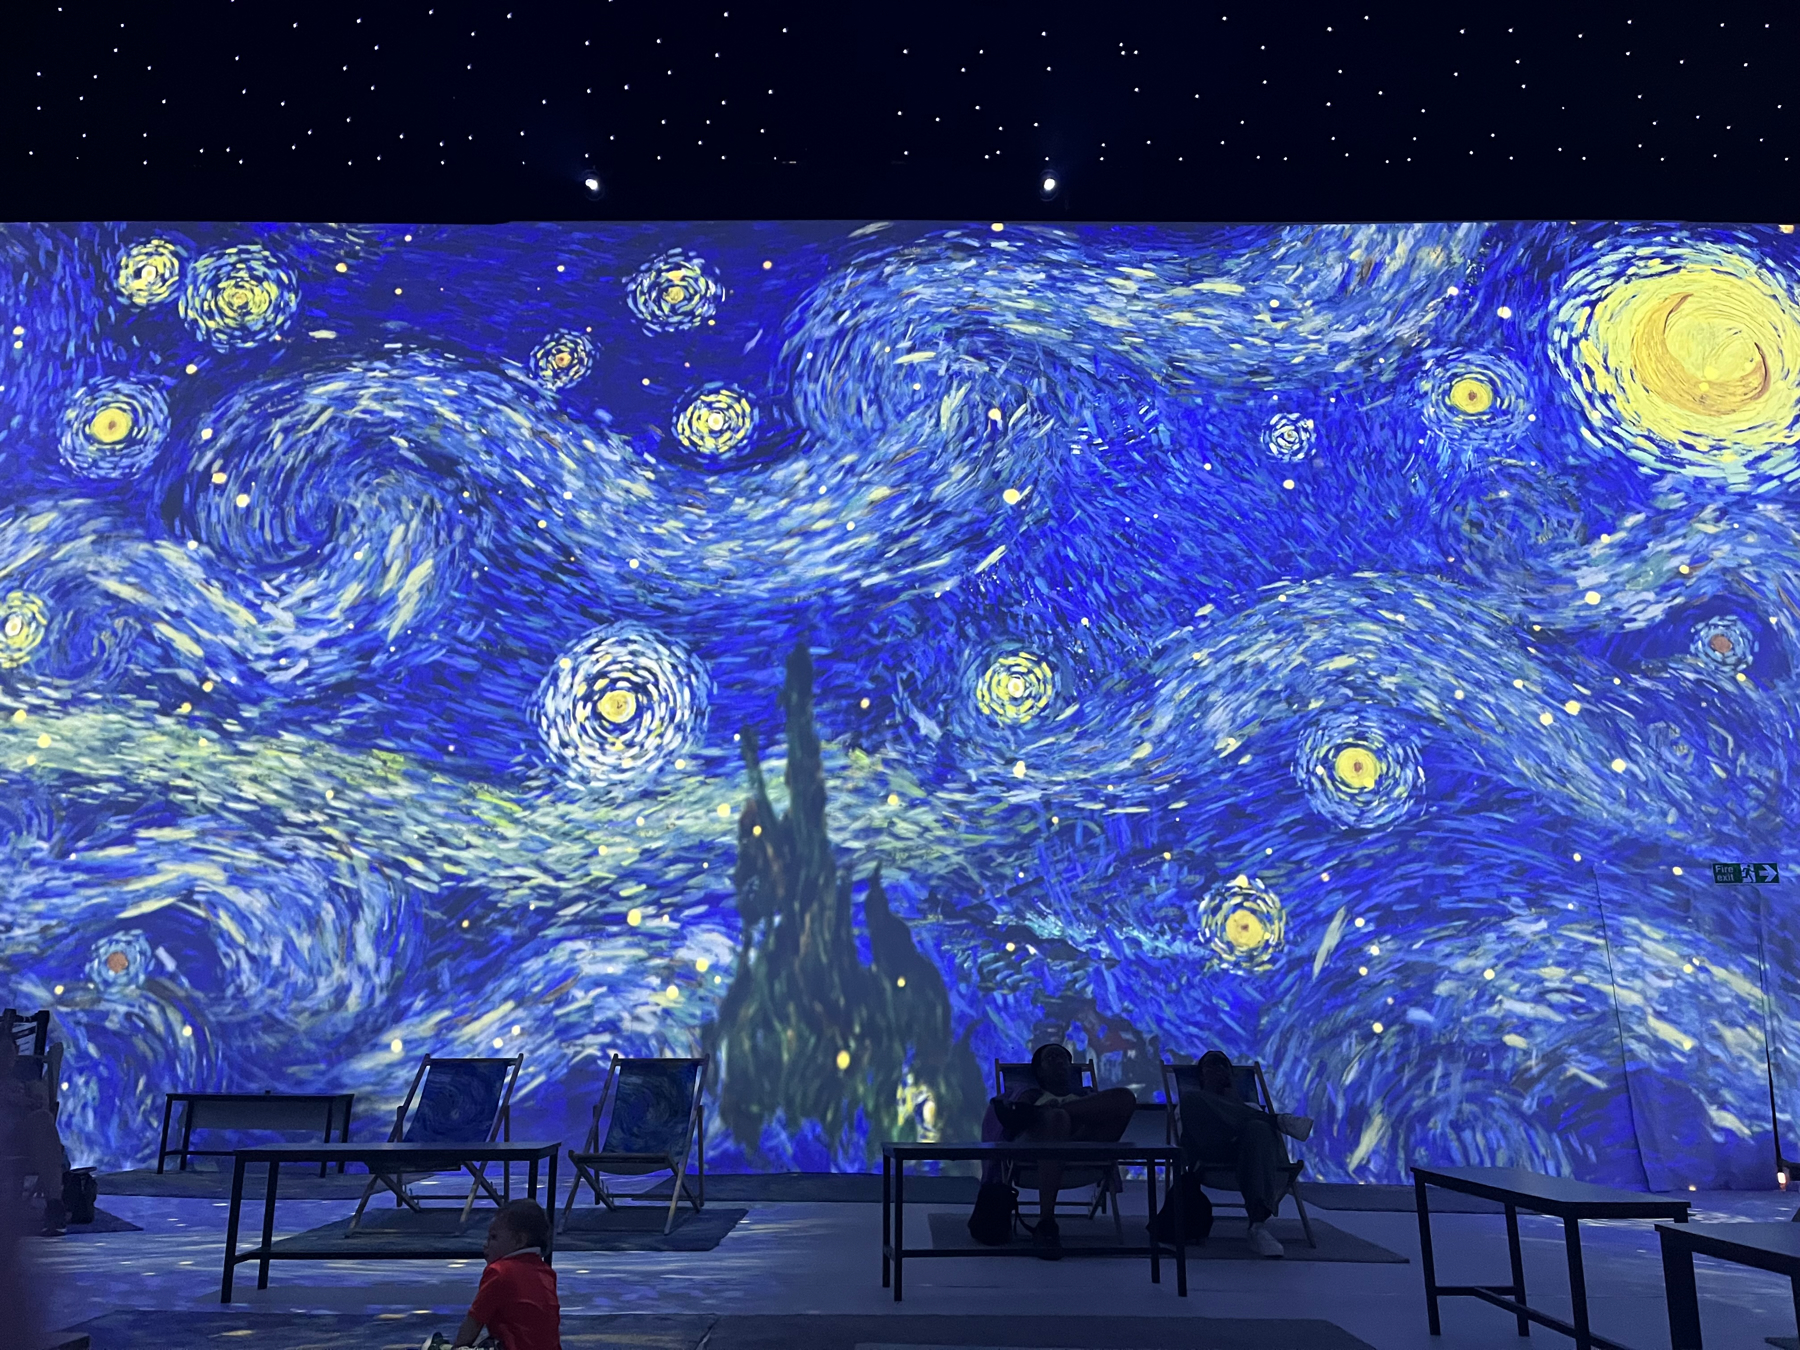 Van Gogh&rsquo;s Starry Night painting projected onto the walls of the exhibition